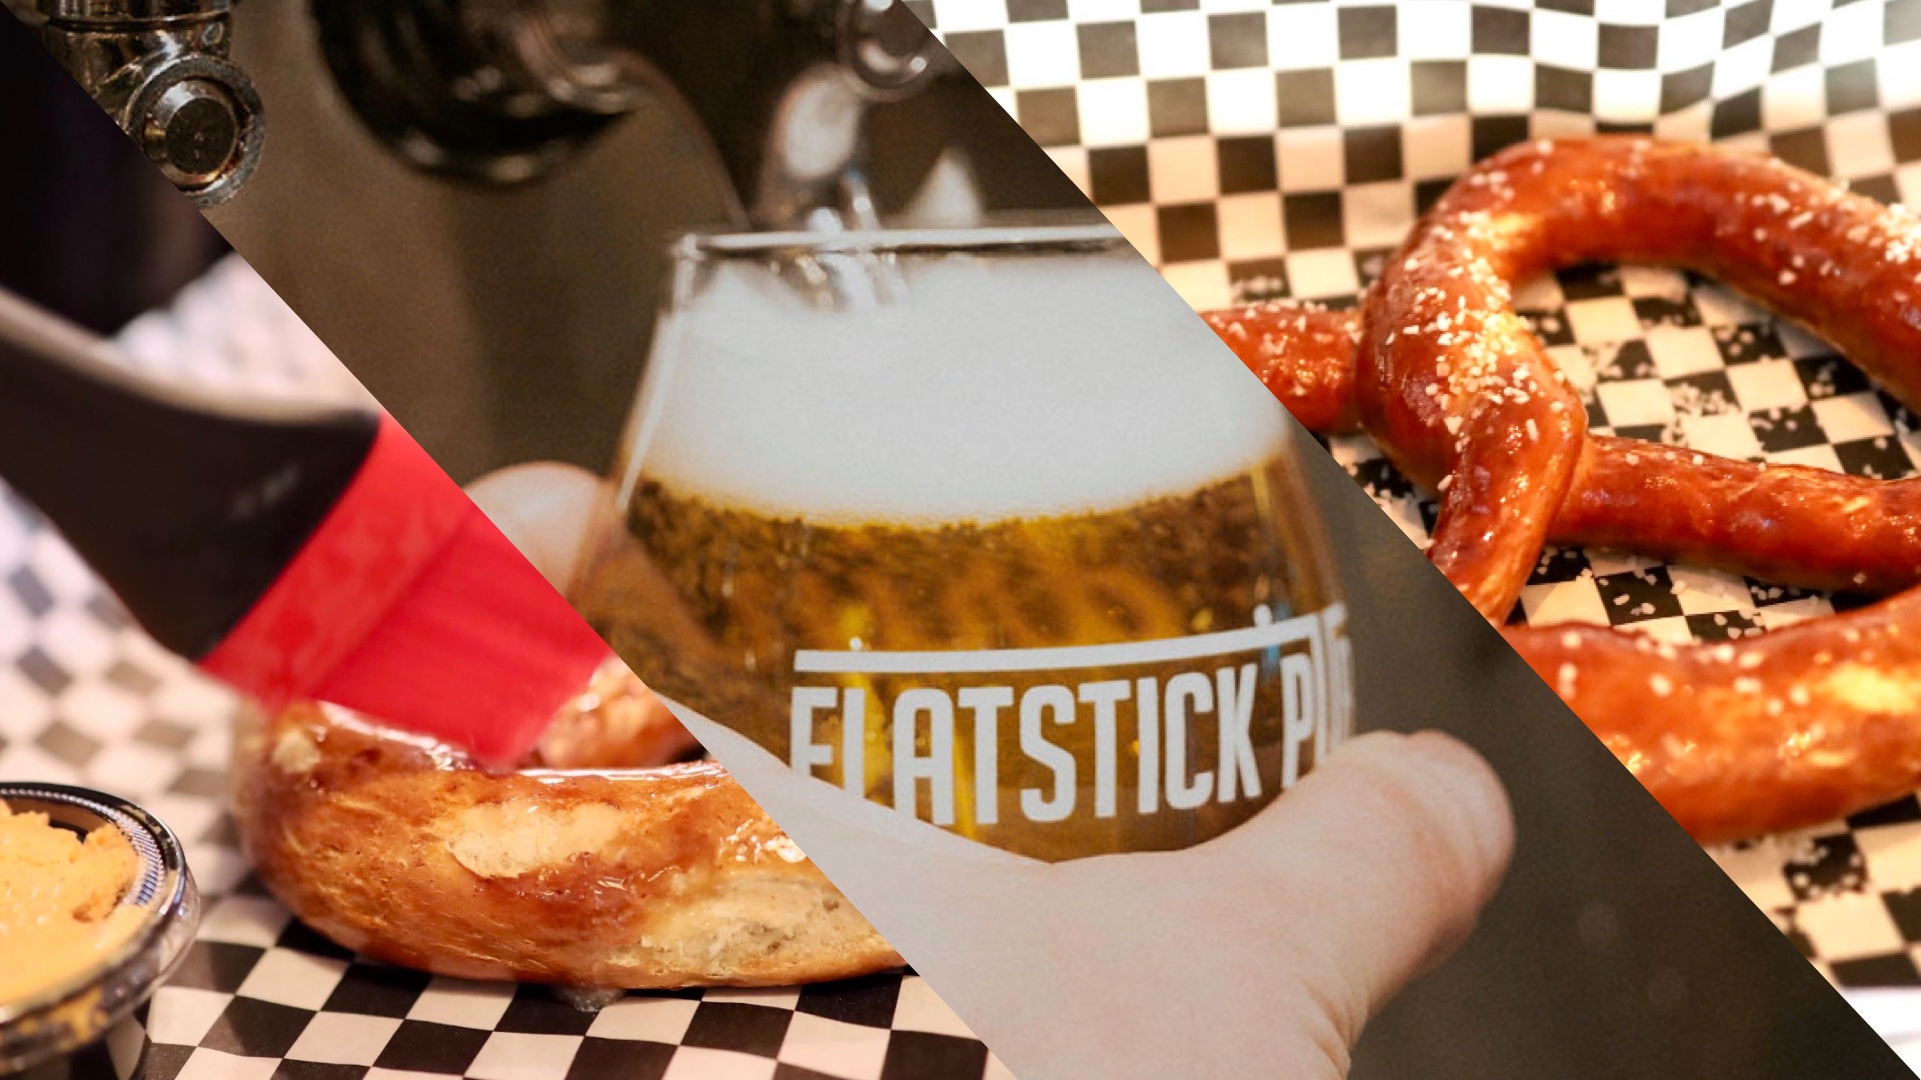 2 BEER Drink Glasses ~ FLAT STICK PUB: Seattle Area Tap & Game Rooms, Party  Fun!